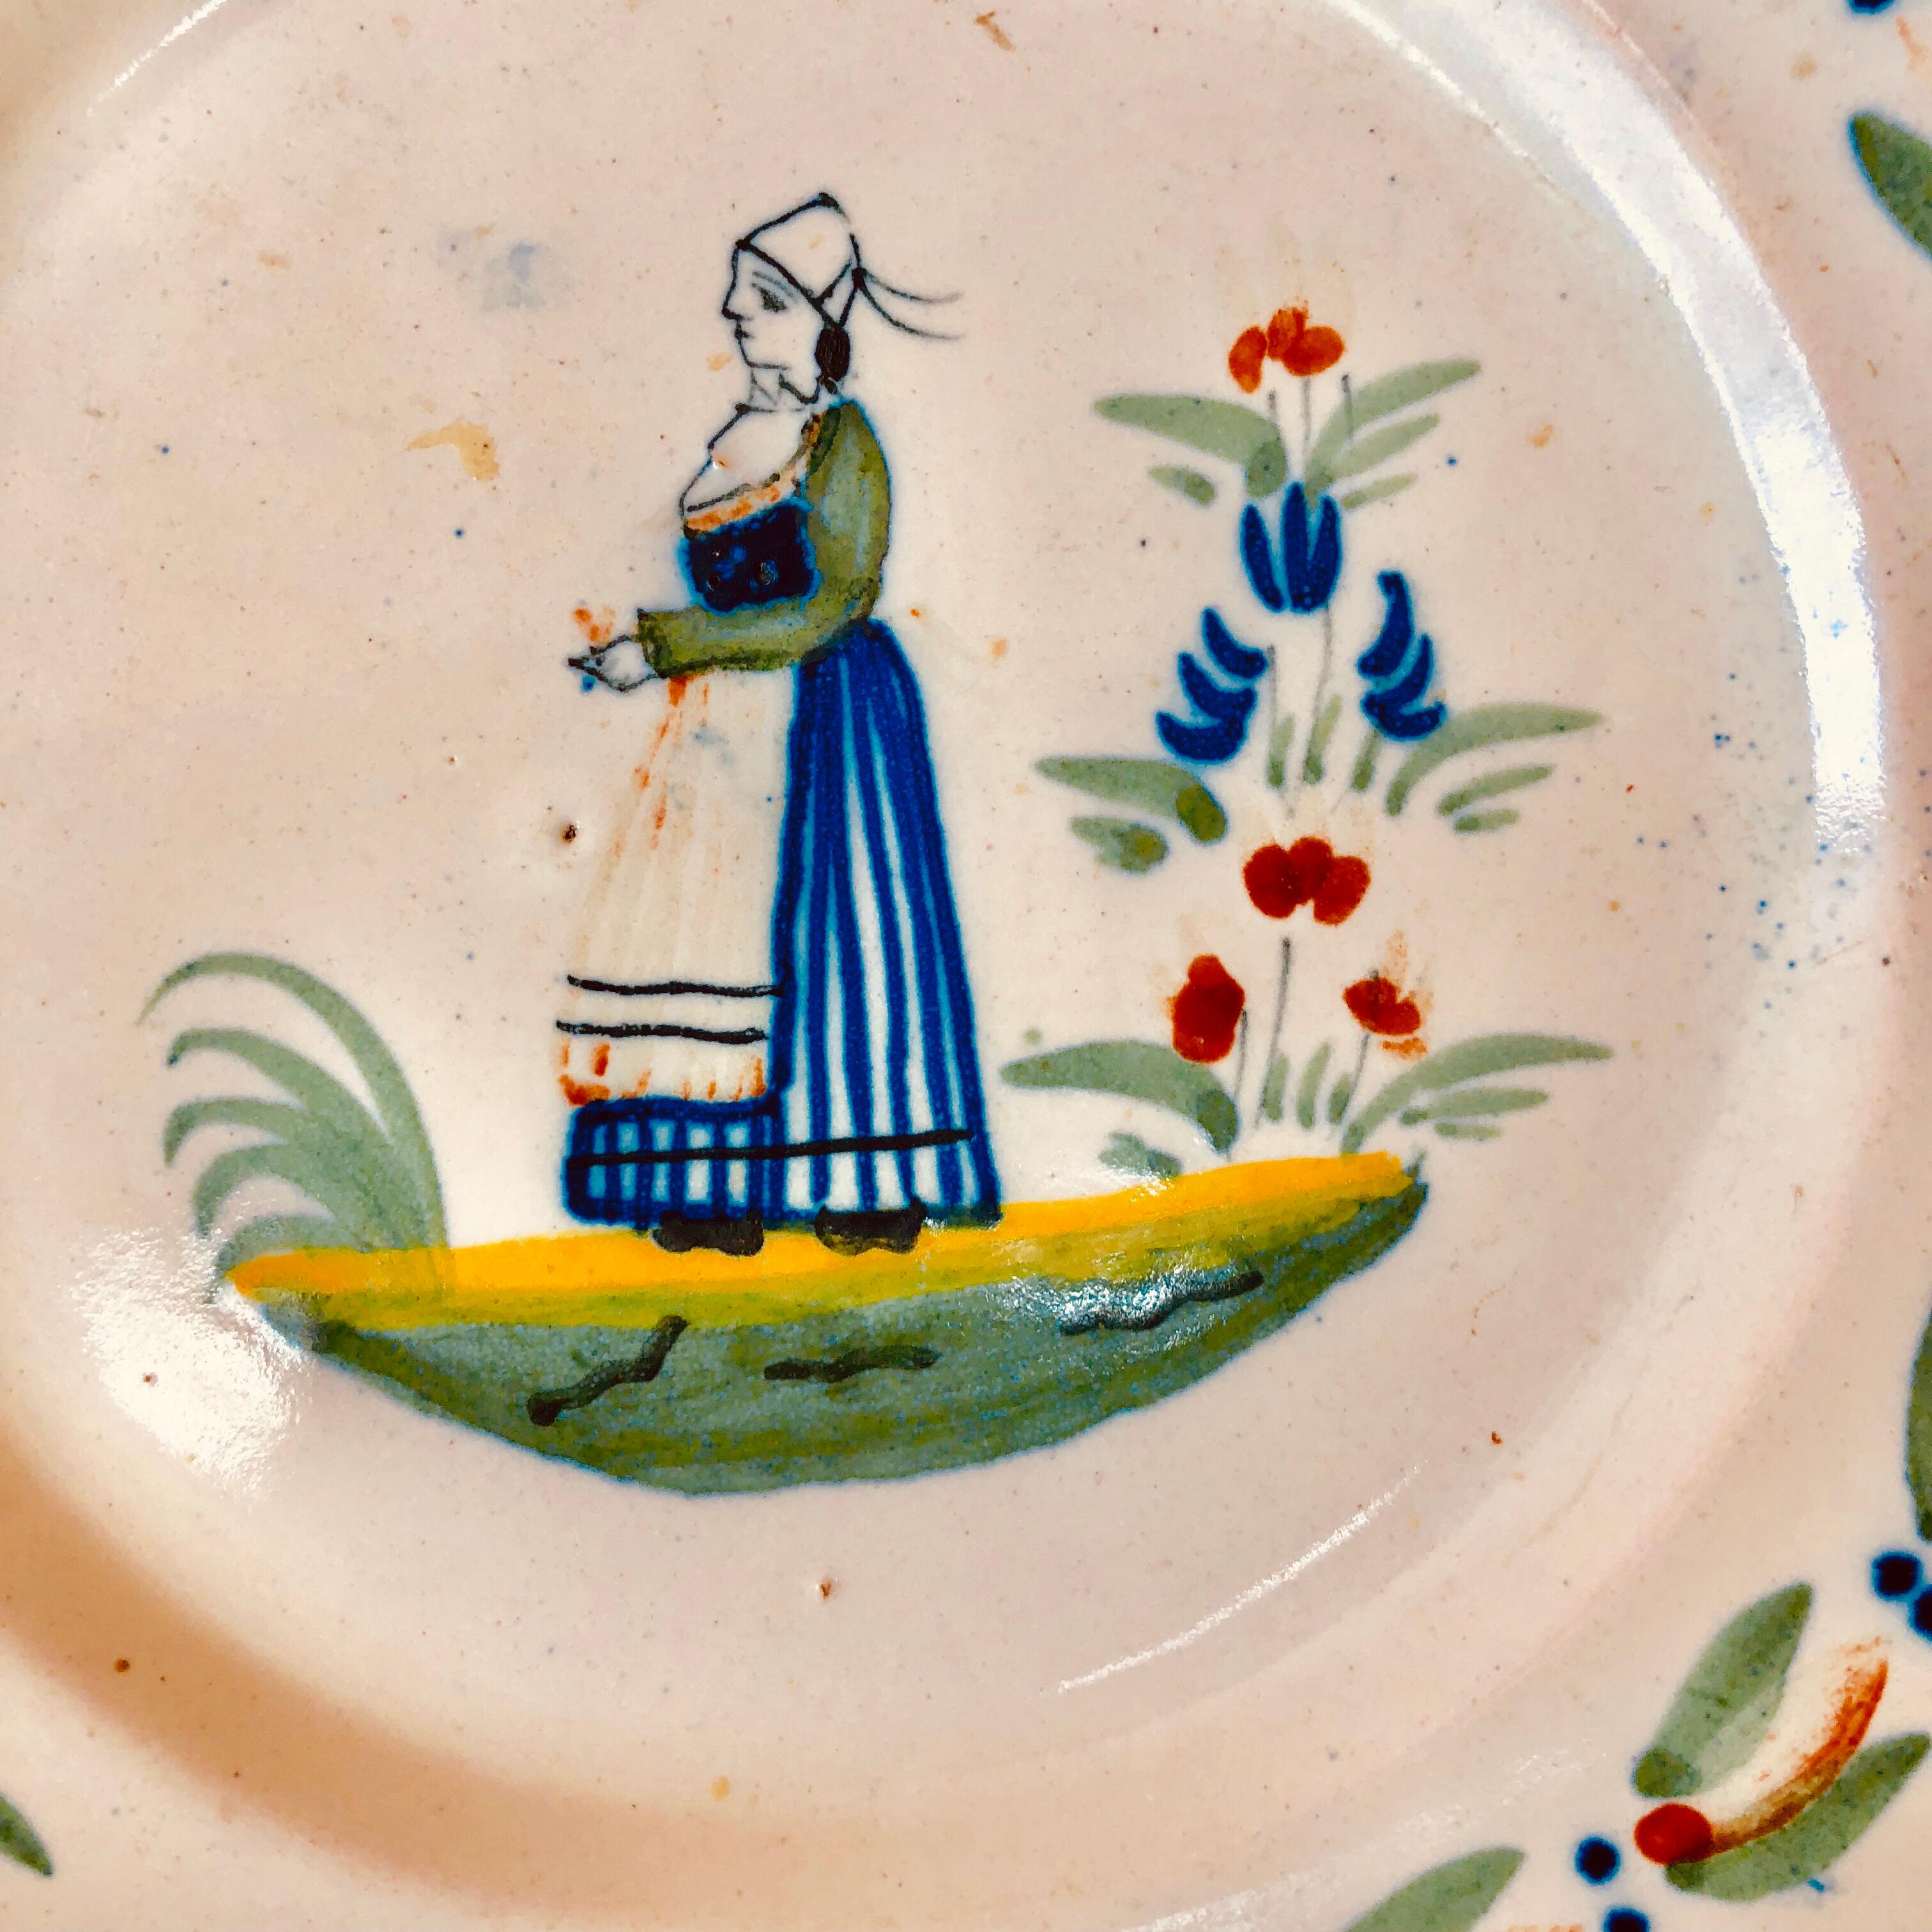 Small faience Quimper plate signed HR Quimper, circa 1900.
Minor chip on underside.